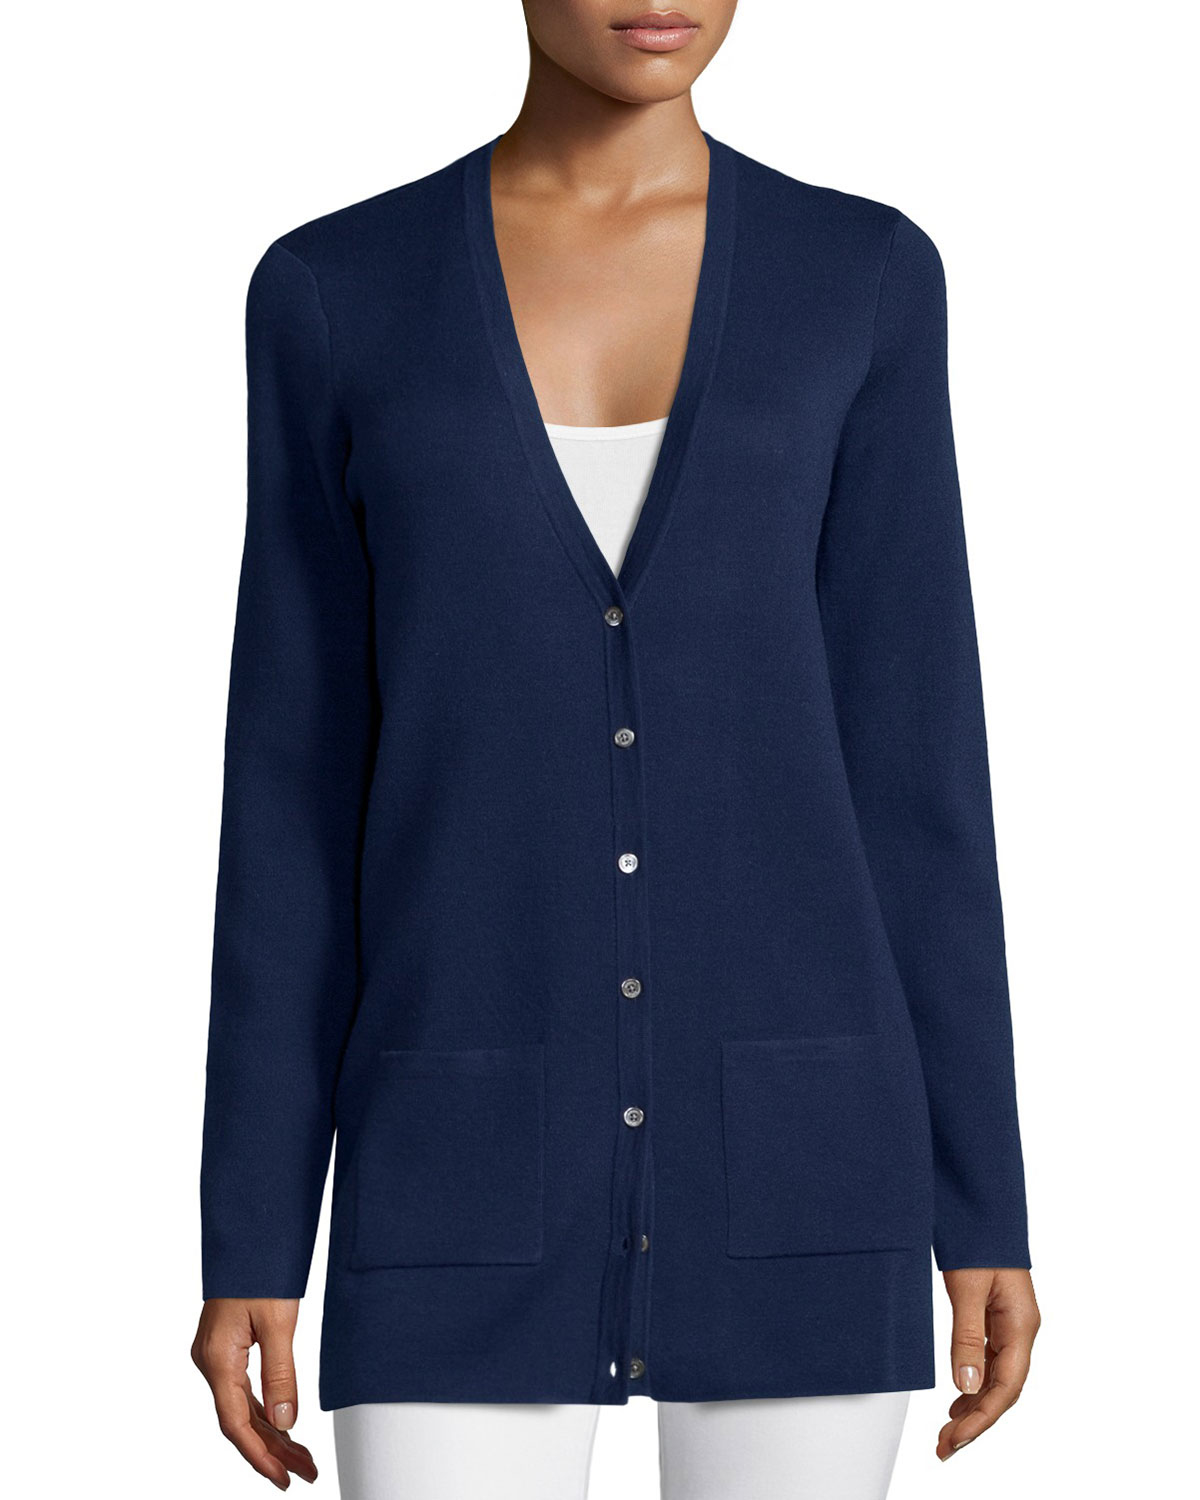 Lyst - Michael kors Button Front Cashmere Cardigan With Pockets in Blue